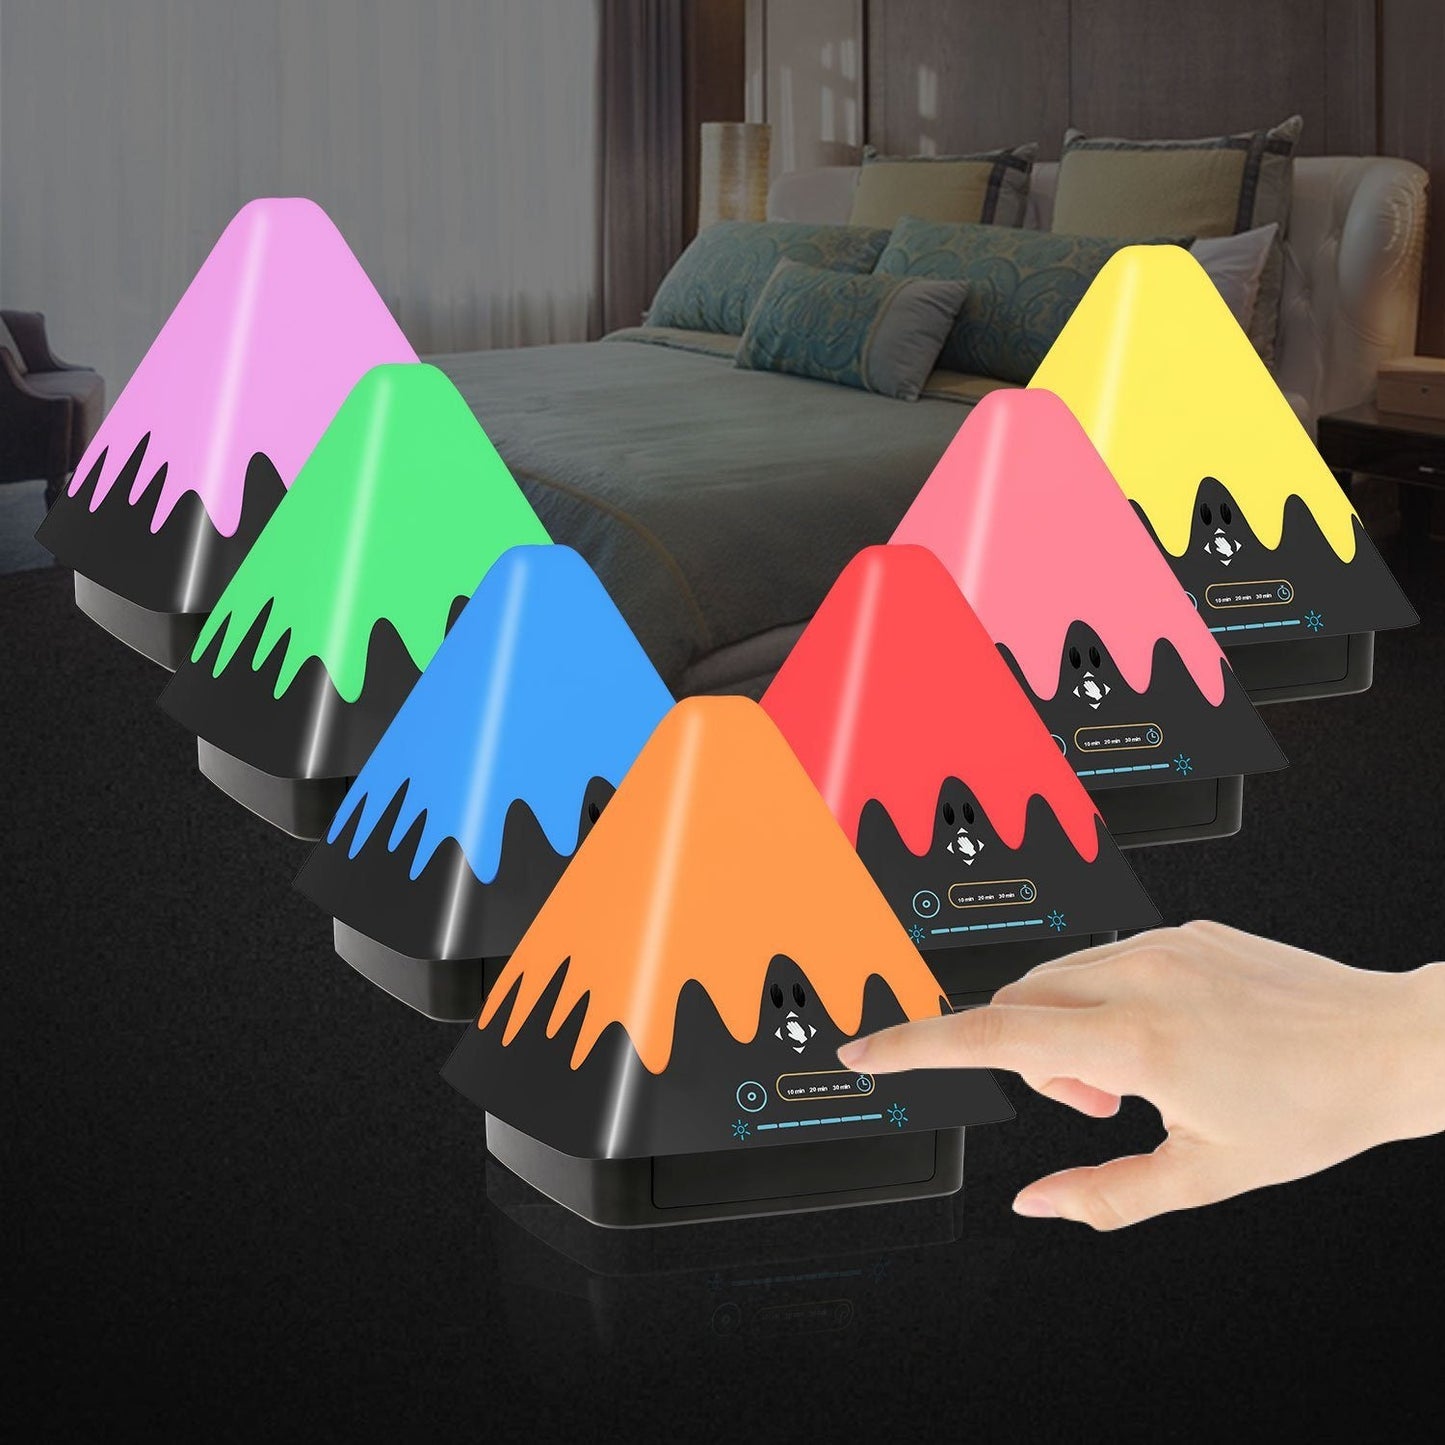 8-Color Touch Control Night Light Indoor Lighting refund_fee:1800 Warranty